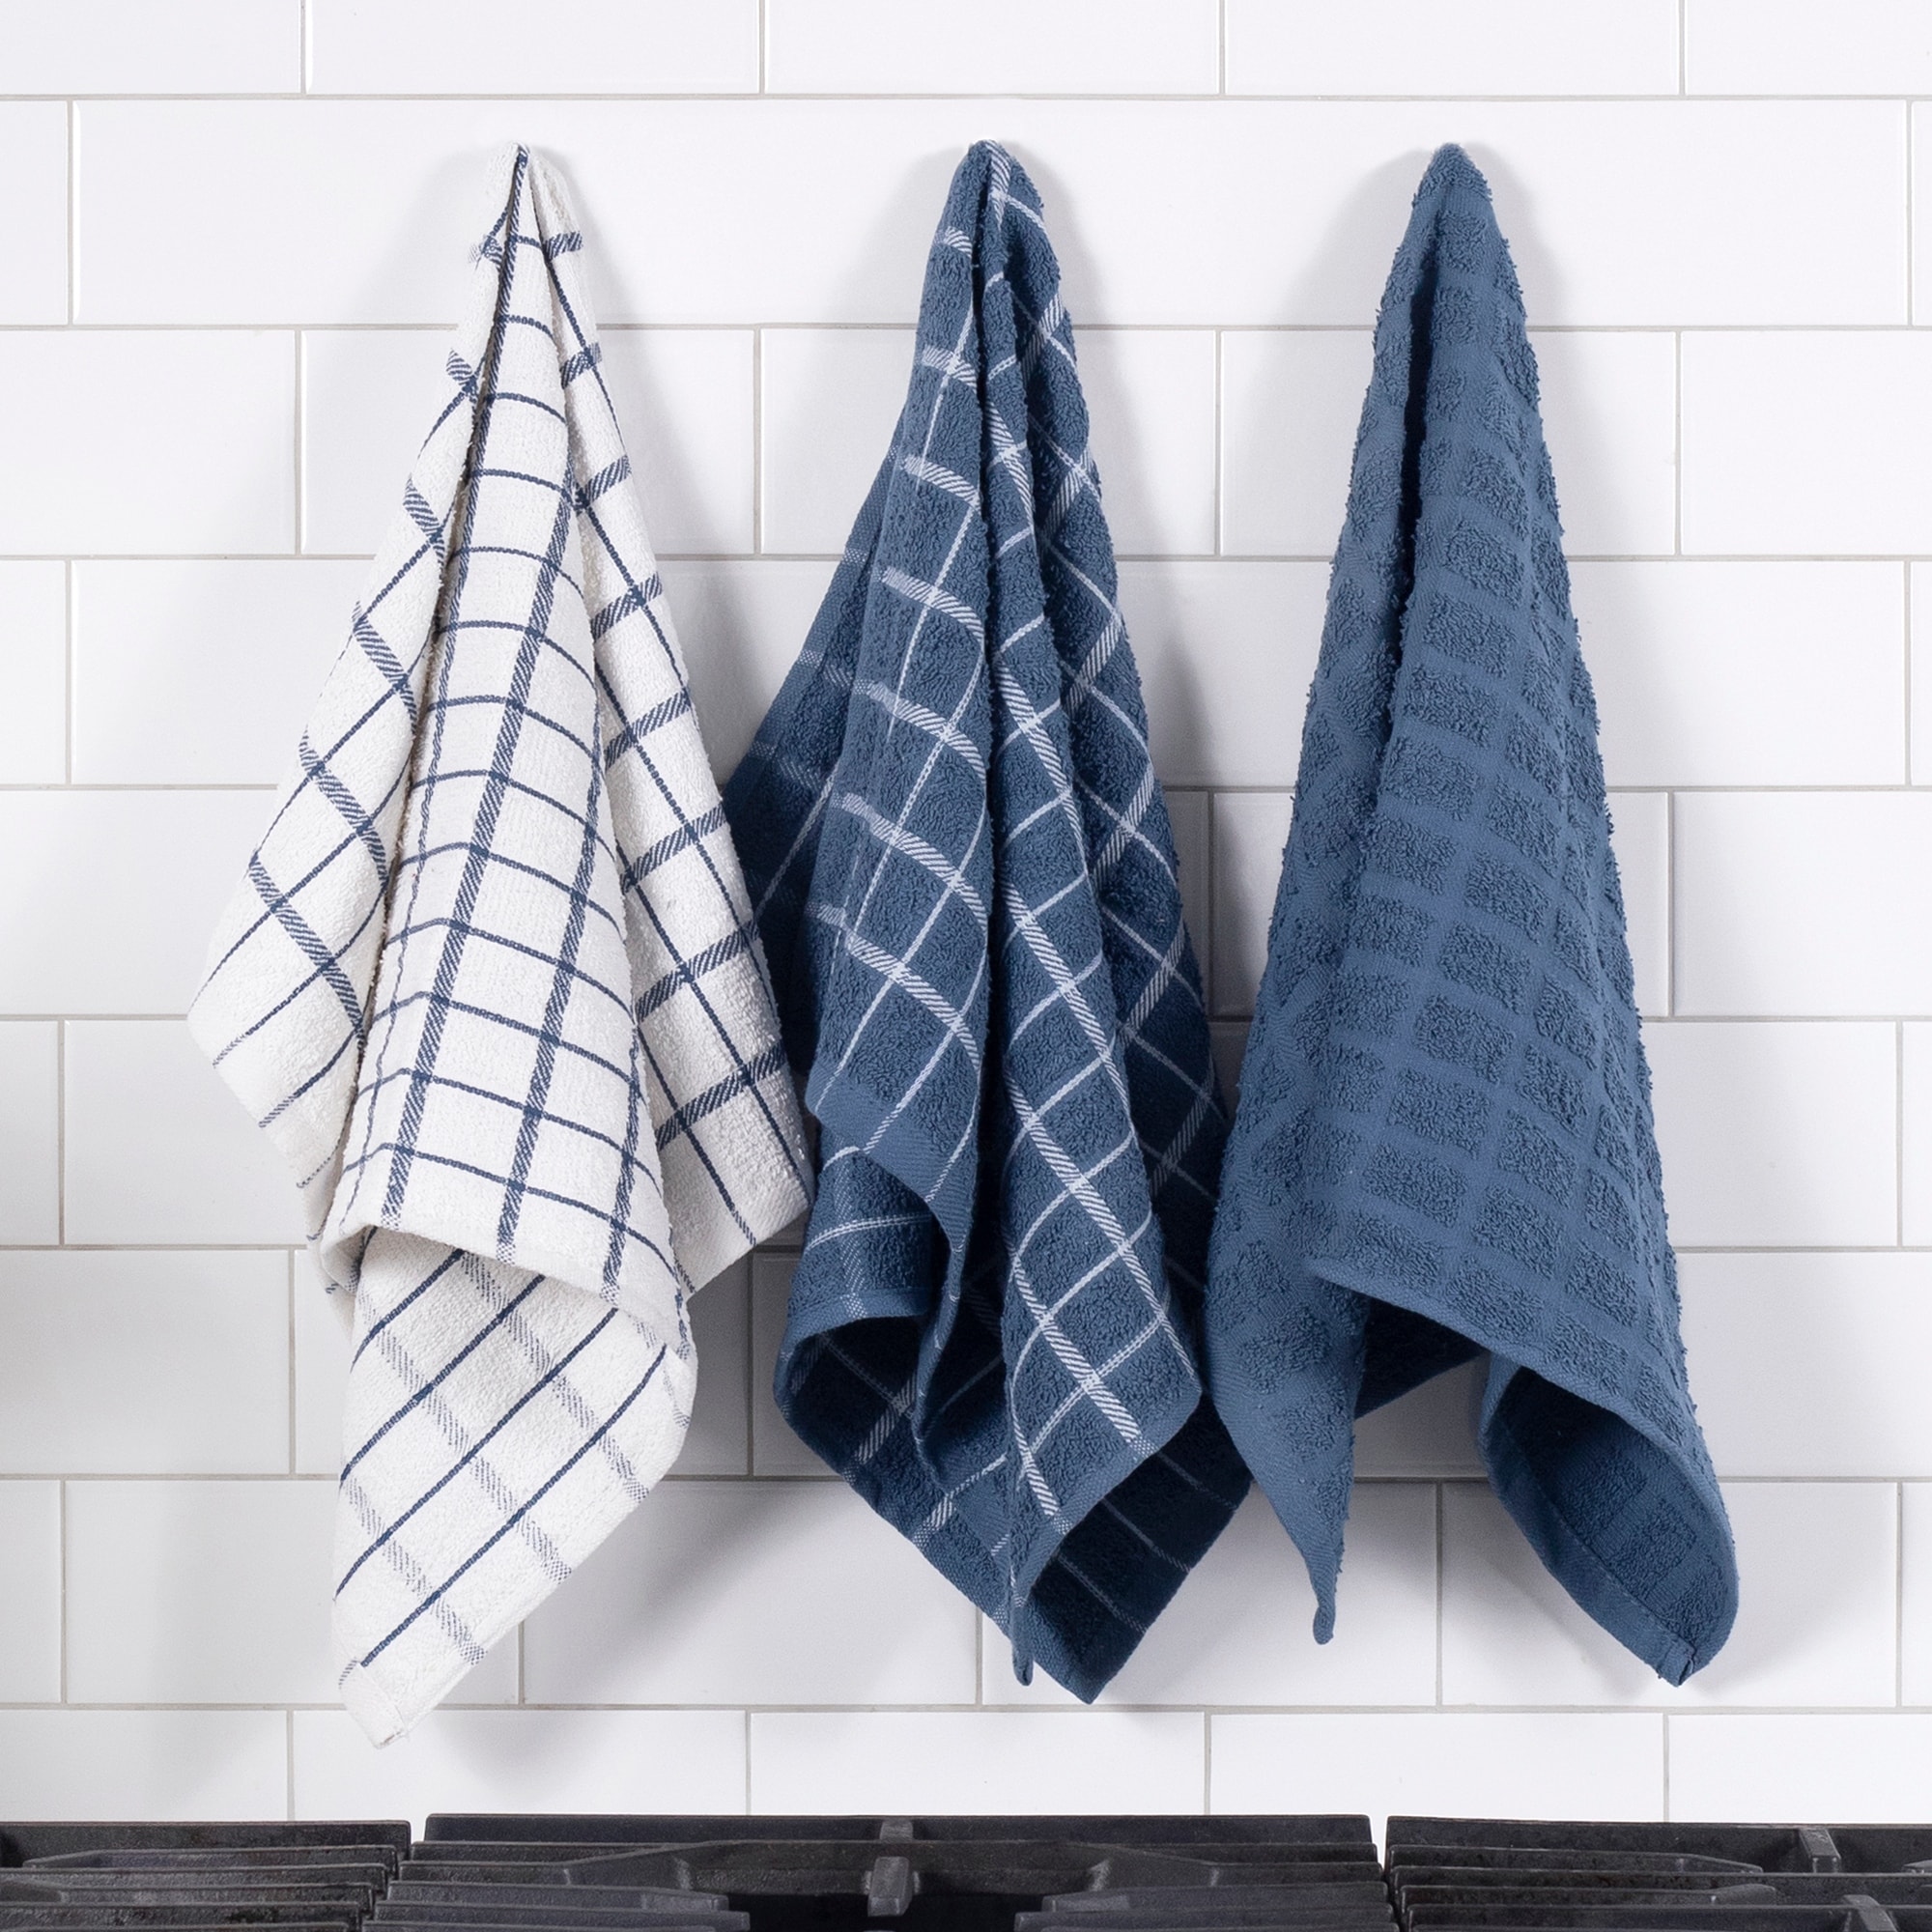 RITZ Cotton Terry Check Kitchen Towels (Set of 3) - Bed Bath